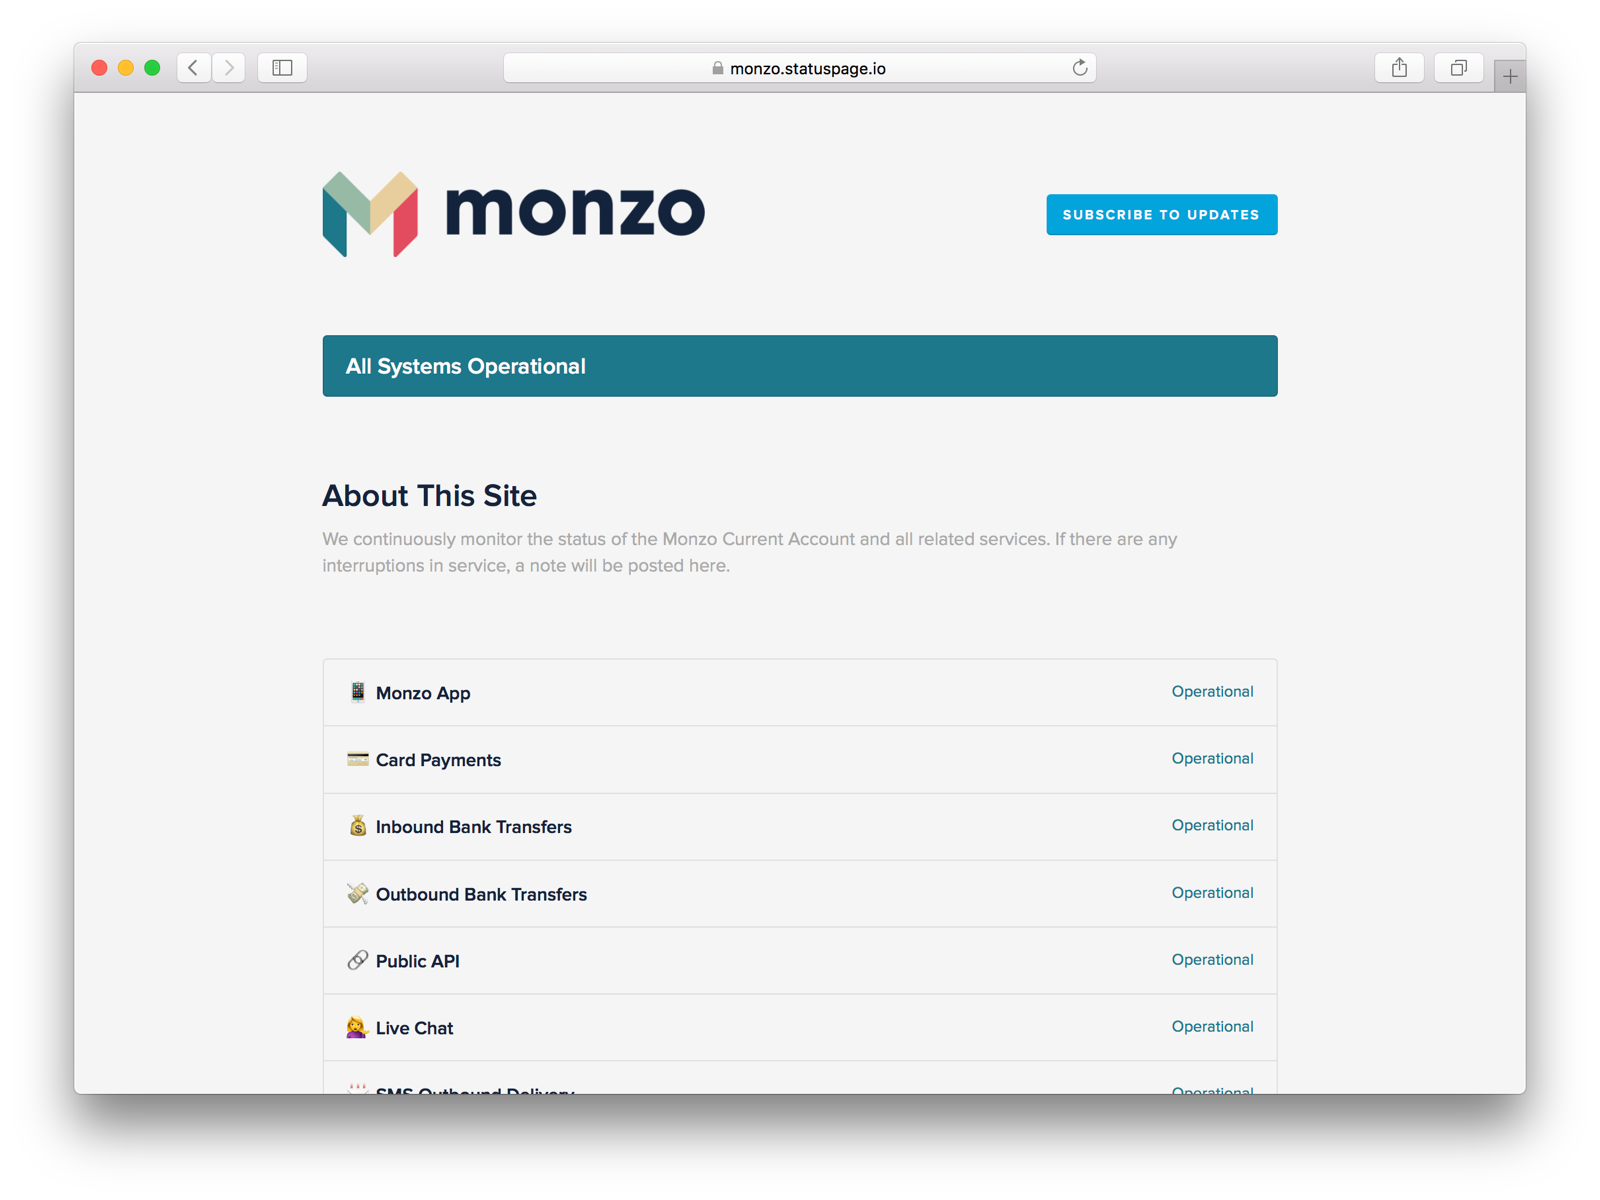 Screenshot of the Monzo public status page